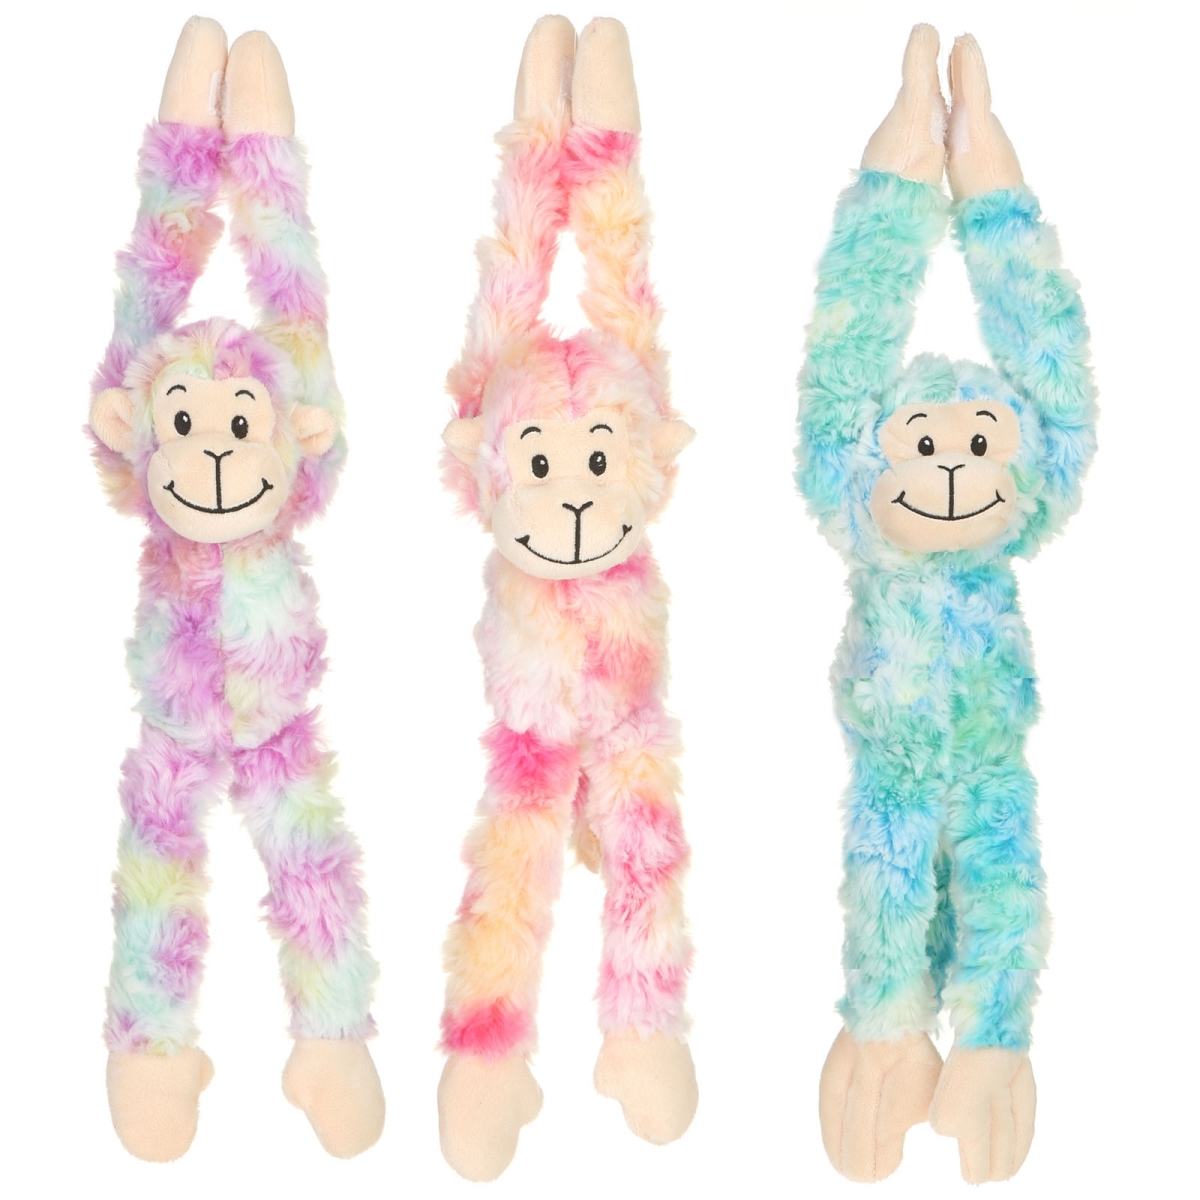 A08070 12 In. Plush Long Arms Monkey - 3 Assorted Color